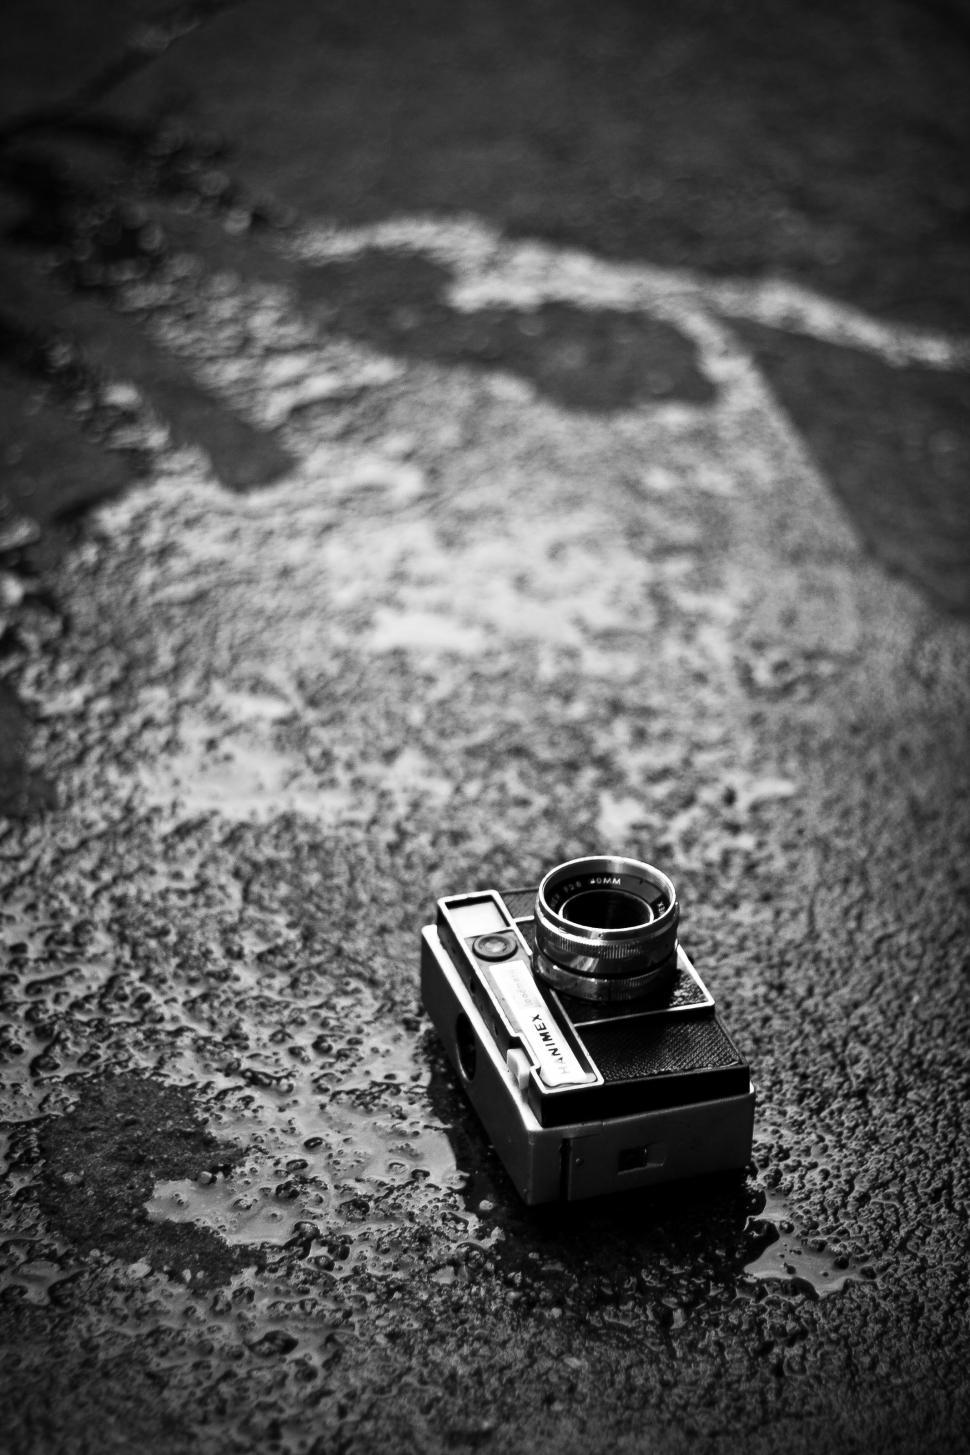 Free Image of Camera on the Ground 